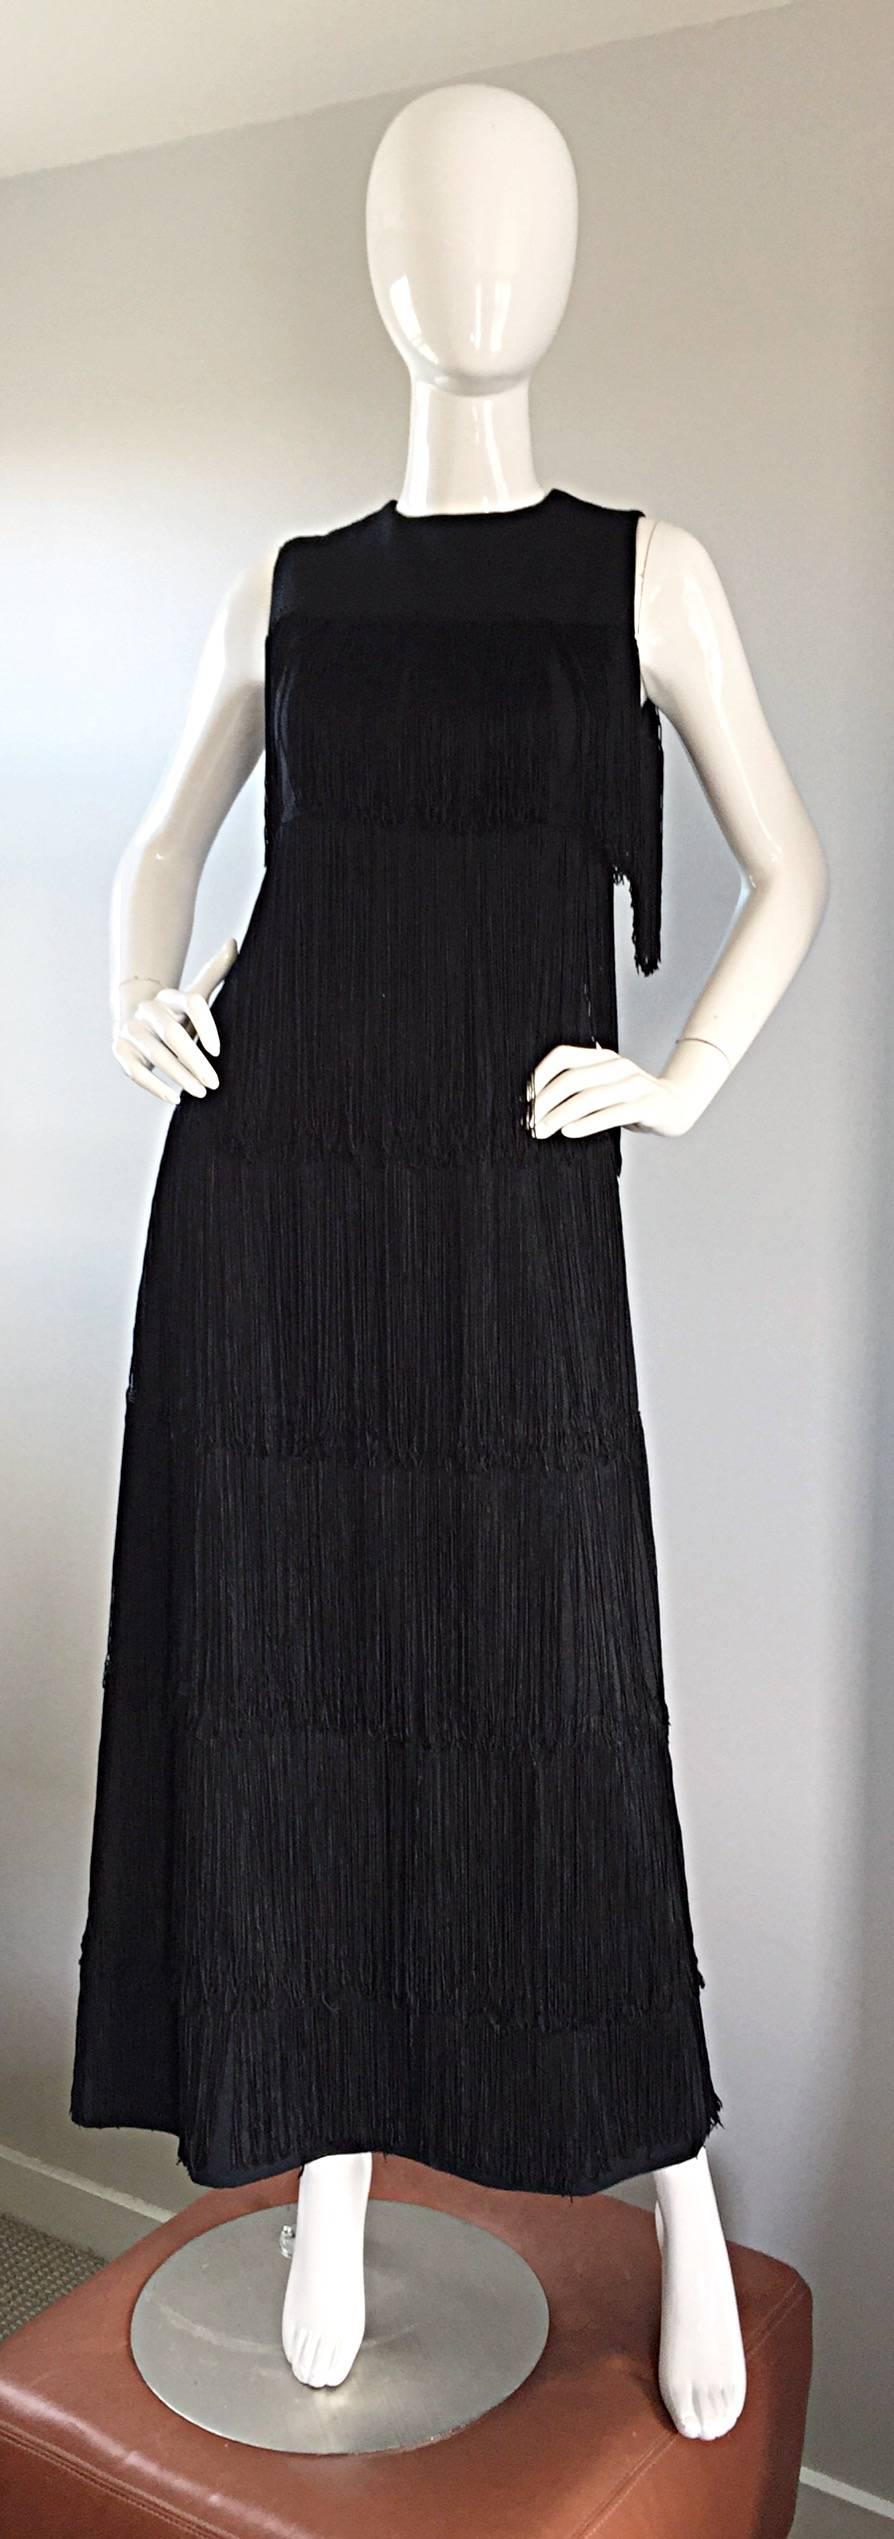 Absolutely fabulous rare 60s ALFRED WERBER black crepe all-over fringed dress! Features hand-sewn fringe panels throughout the entire dress. Looks amazing on, especially with movement. Alfred Werber was an exclusive designer to many starlets,